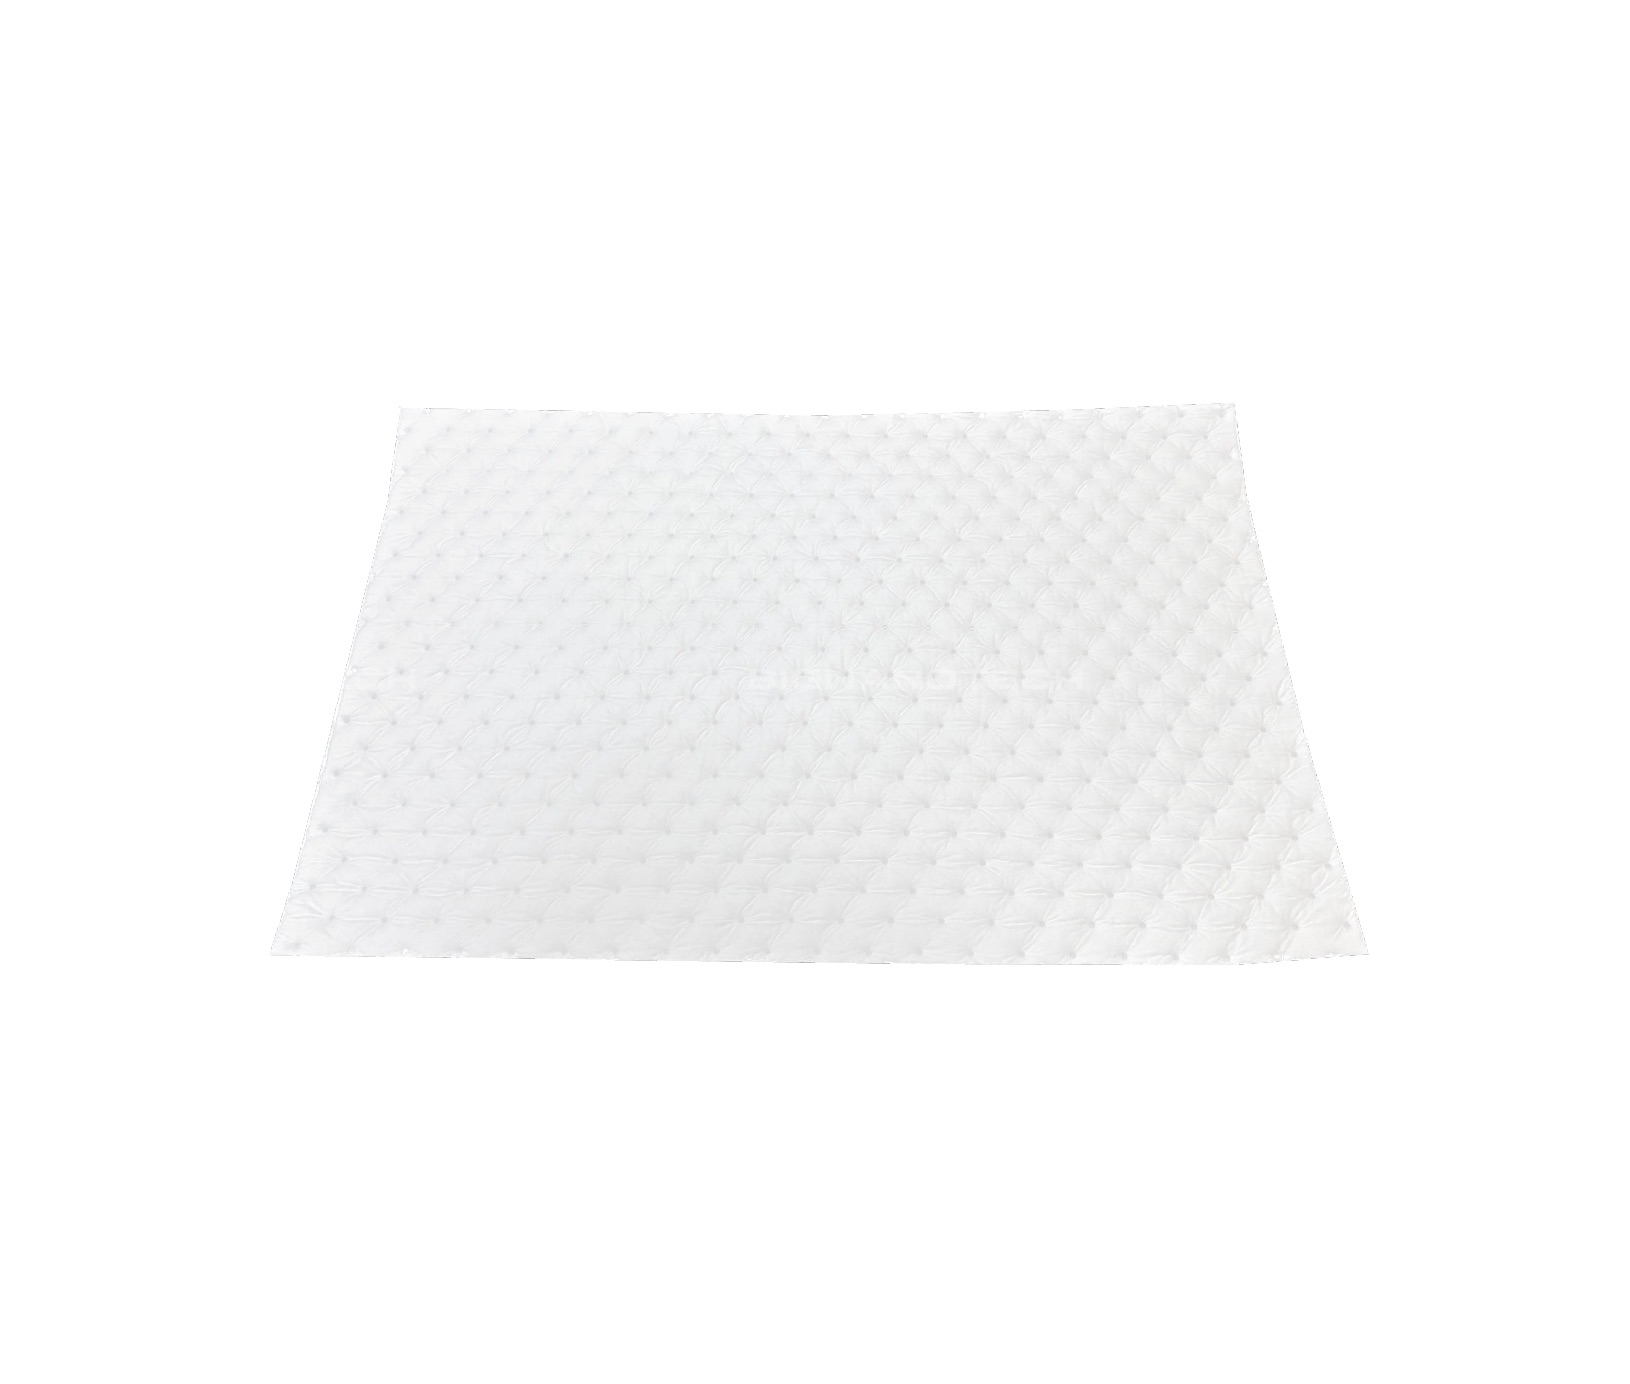 SOUND ABSORBING COTTON, SOUNDPROOFING, THERMAL INSULATION